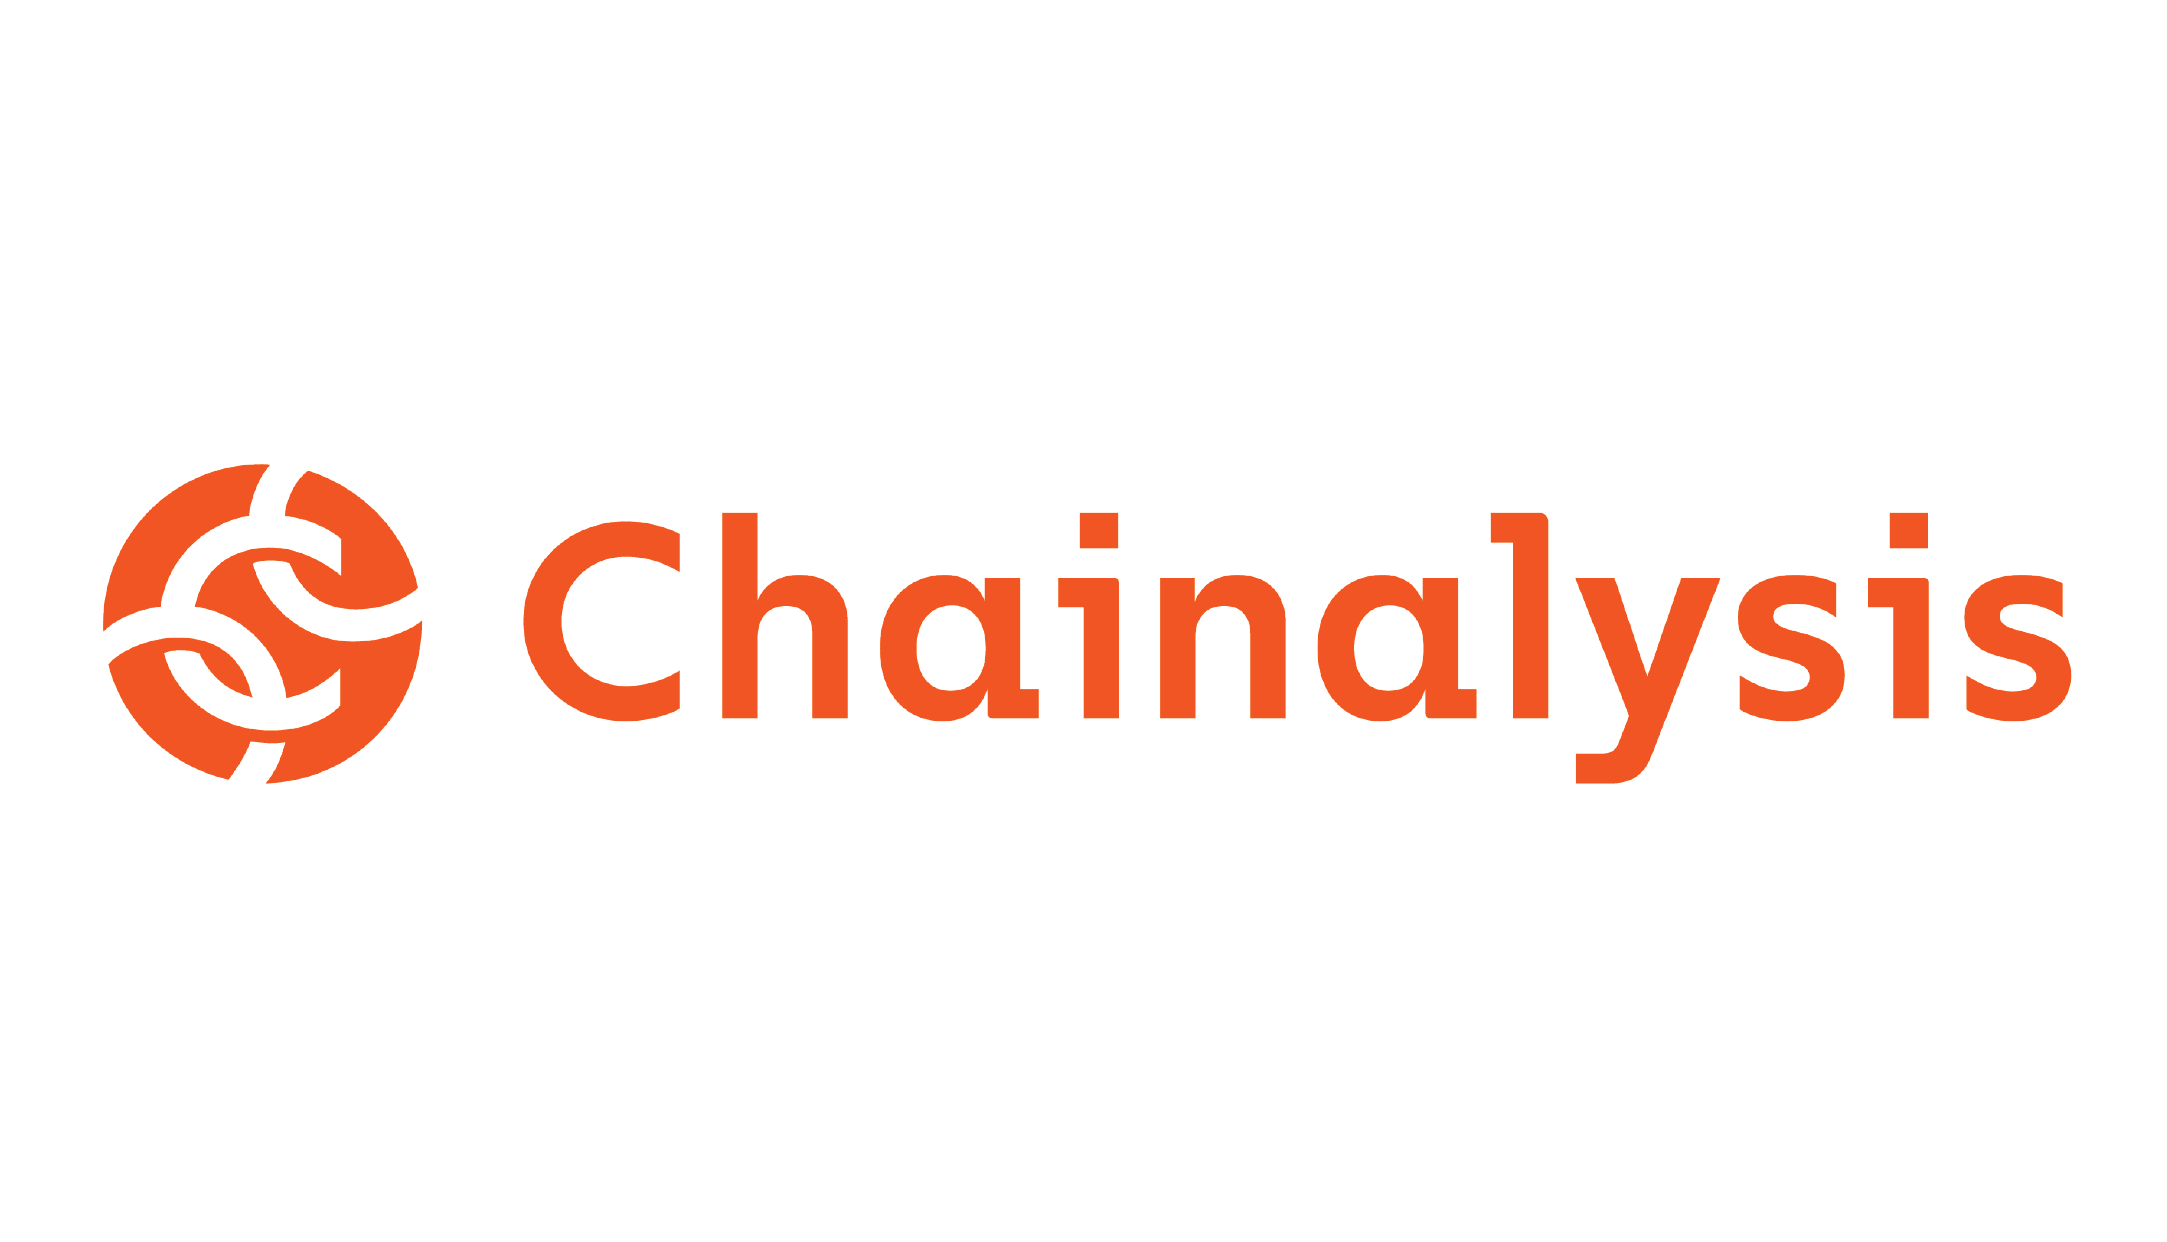 https://thaifintech.org/wp-content/uploads/2022/12/520x298-Chainalysis-02.png